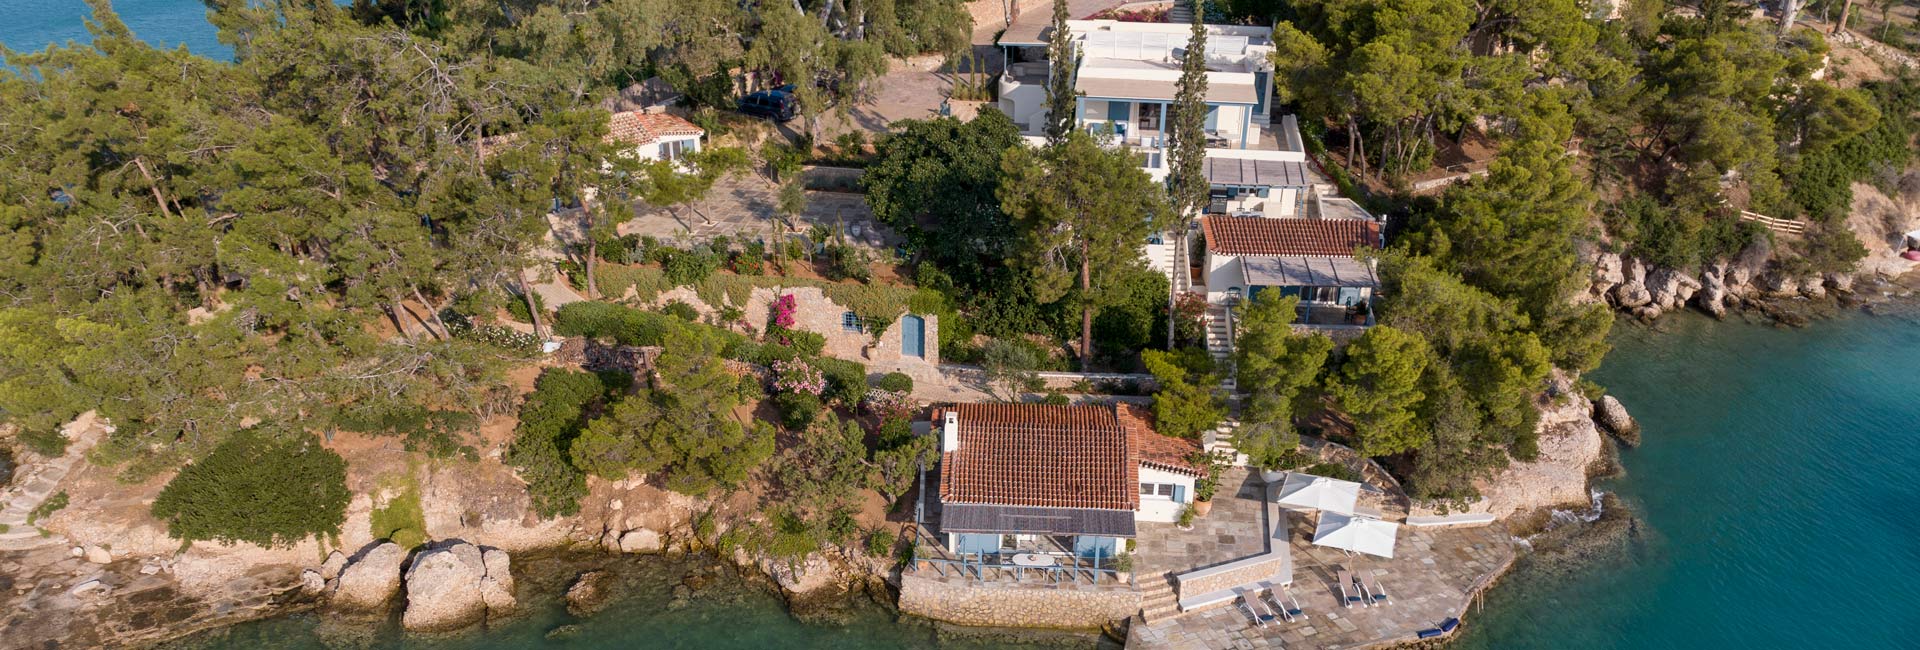 Luxury Villa Santa Maria | Porto Heli Greece all houses & sections from above, drone image